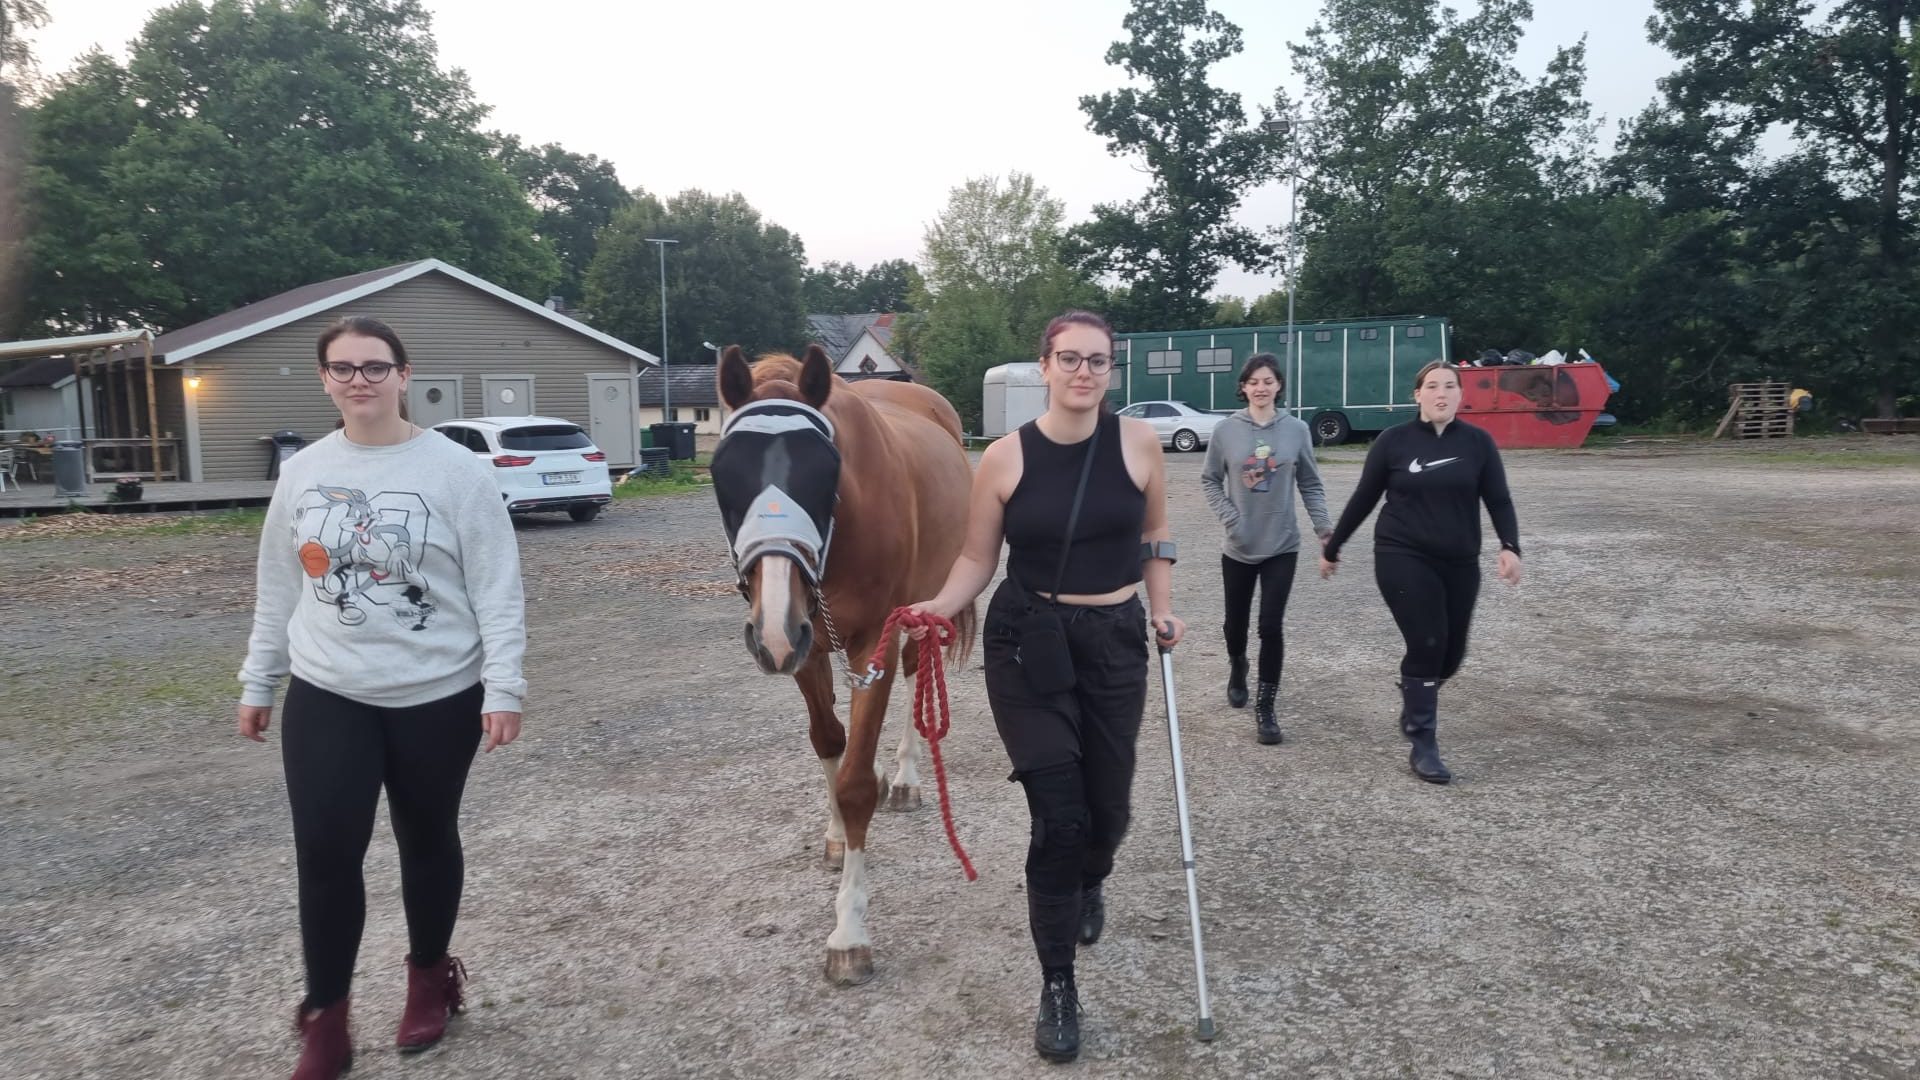 Students walk alongside and guide a horse through camp site in Sweden